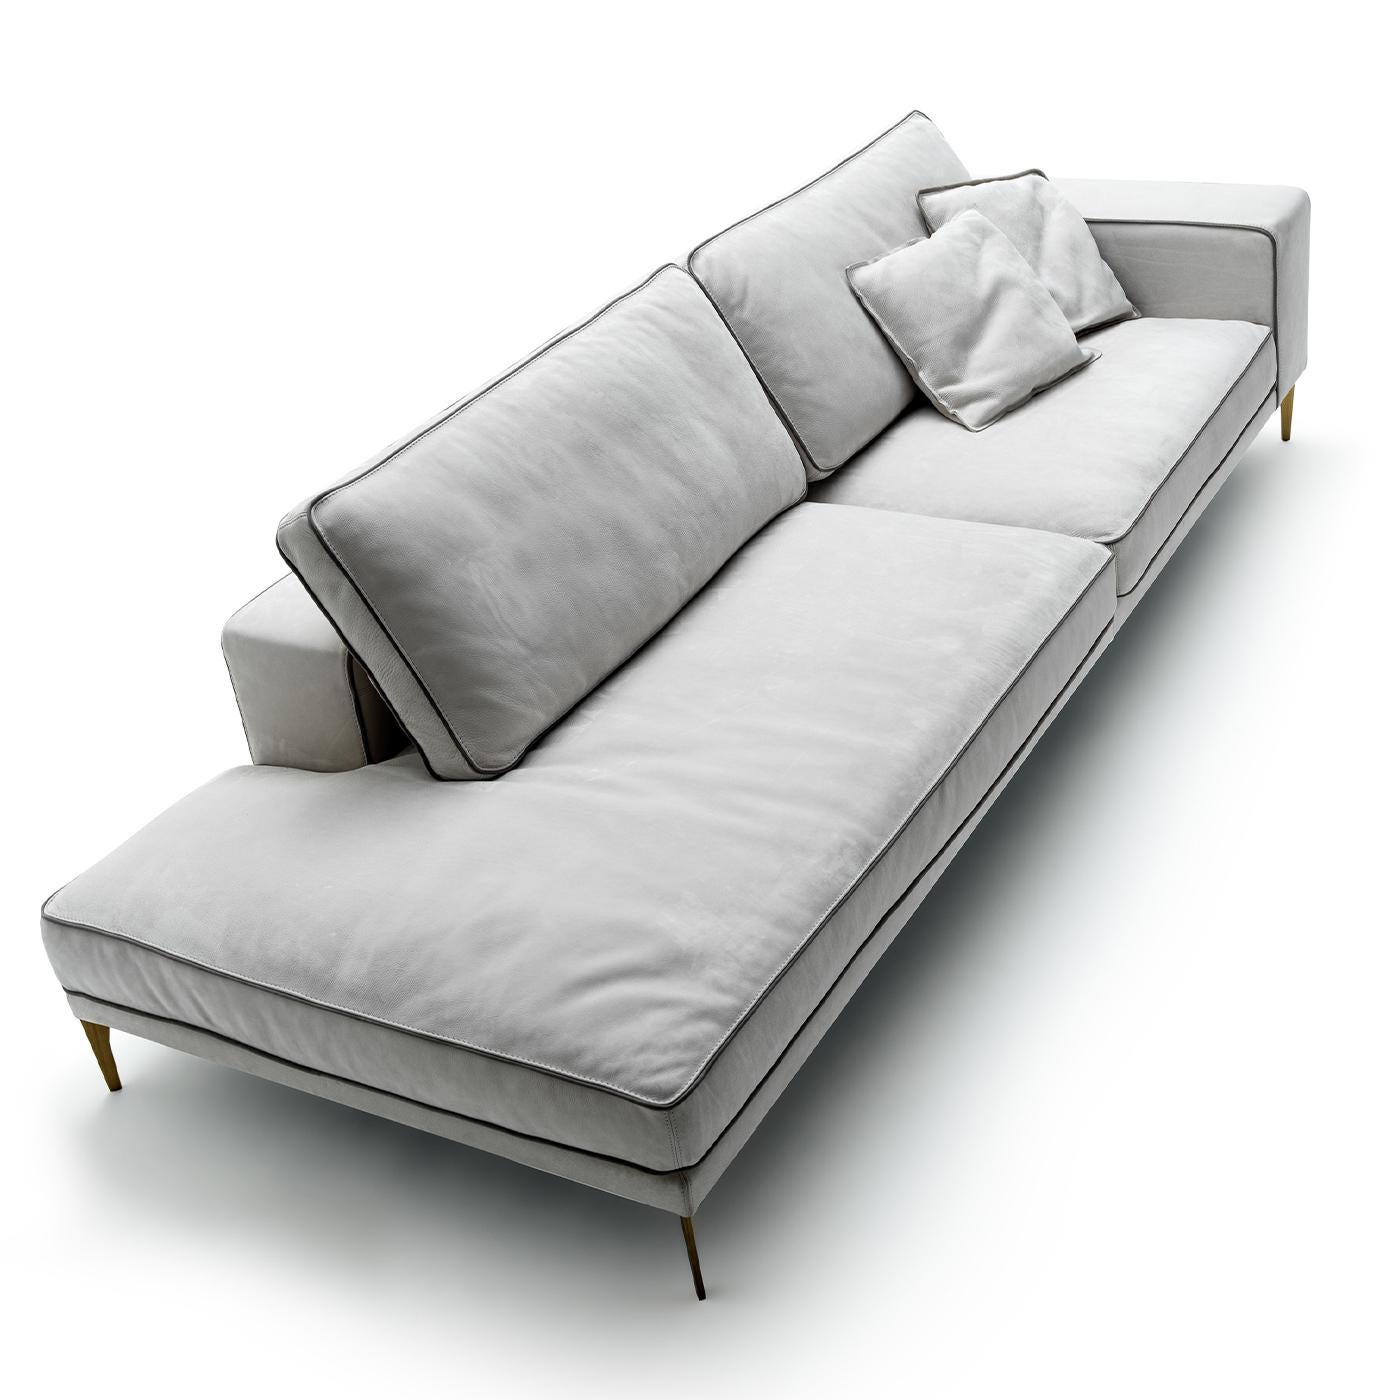 A clean and essential design marked by soft and embracing lines, this sofa was designed by Castello Lagravinese Studio. Its welcoming silhouette rests on metal feet boasting a satin brass finish, and is exquisitely upholstered of white Grassé